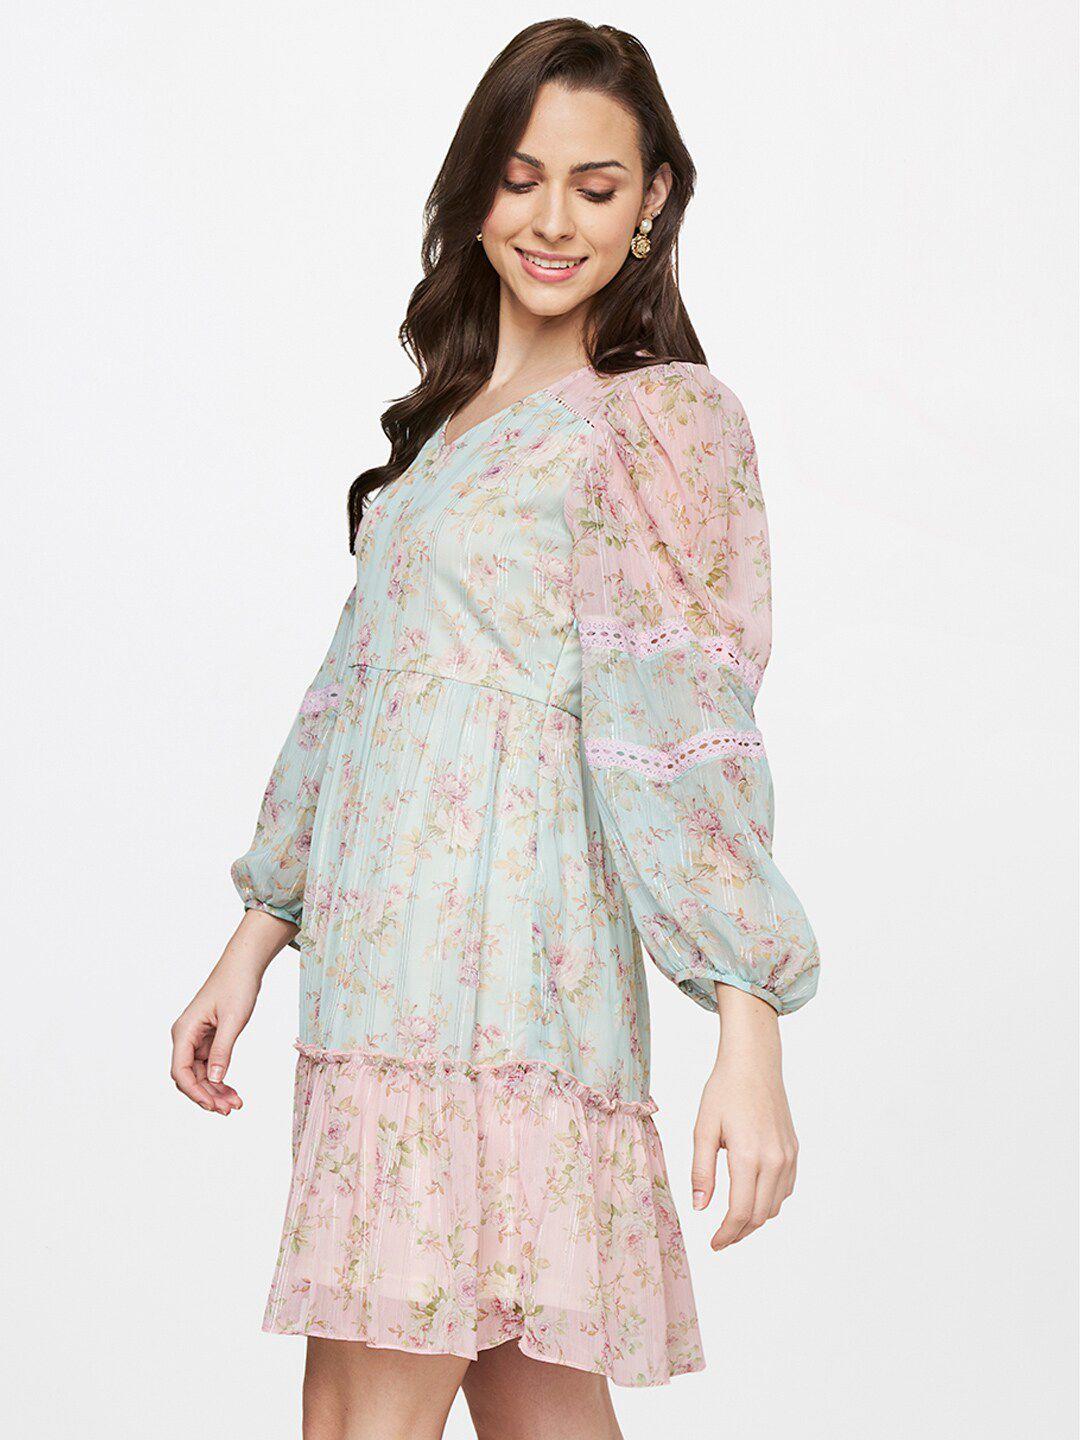 and-multicoloured-floral-printed-lace-insert-dress